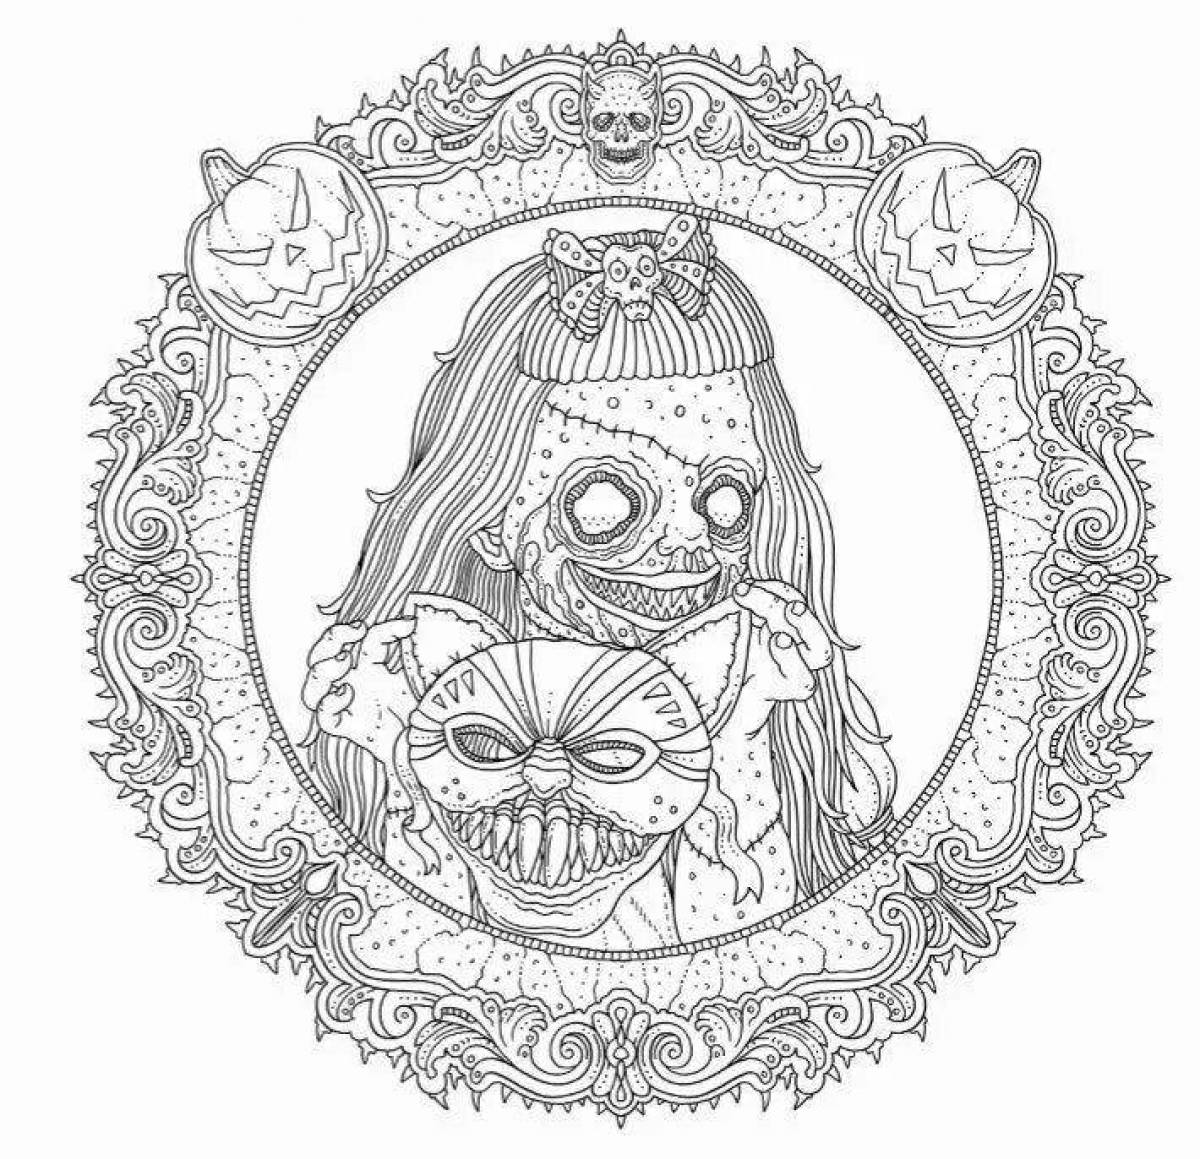 Coloring page scary but beautiful: creepy